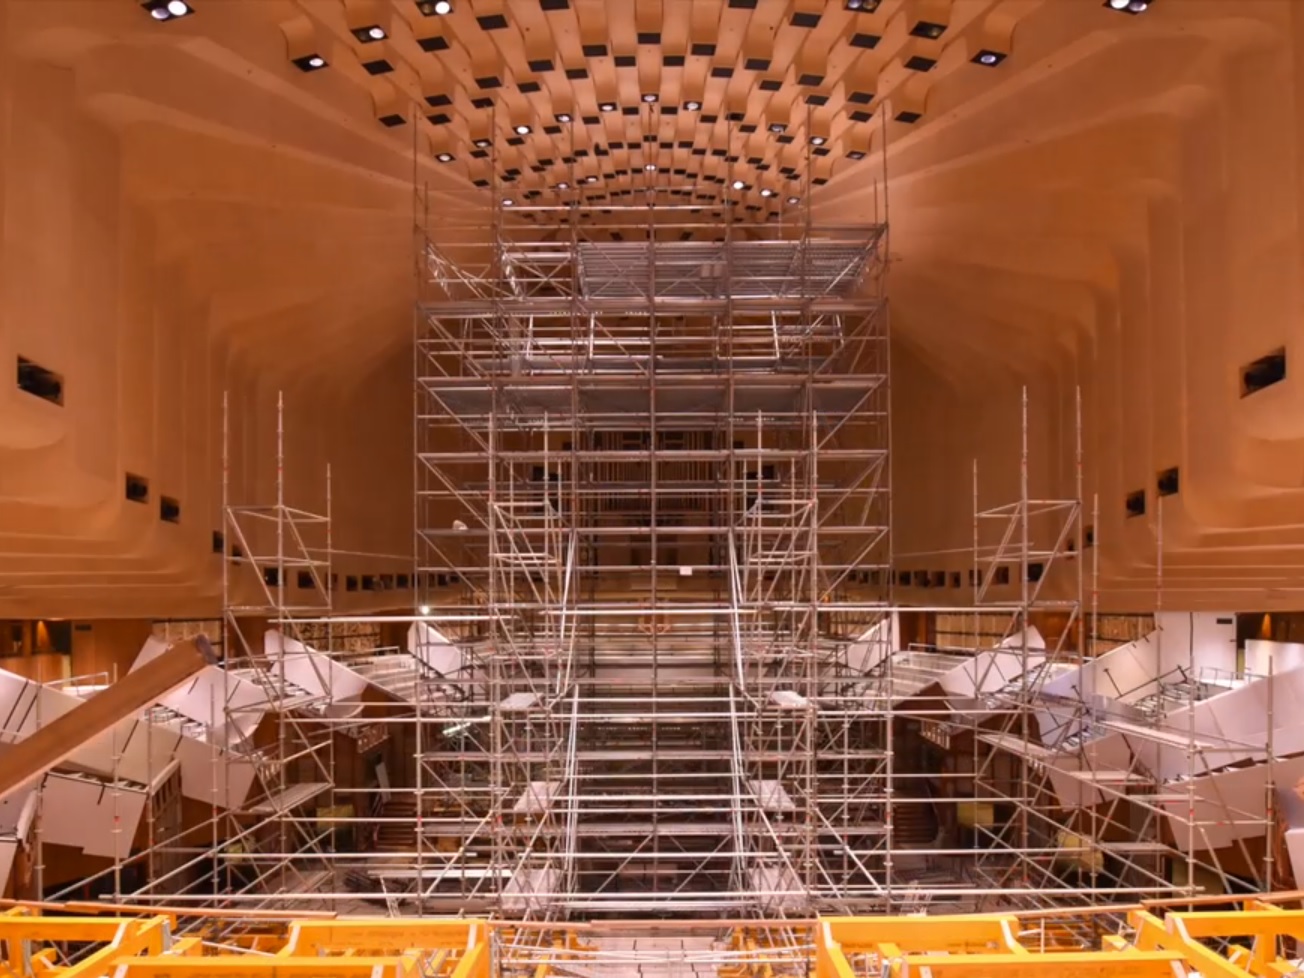 Scaffolding installed to reach the ceiling of the Concert Hall.